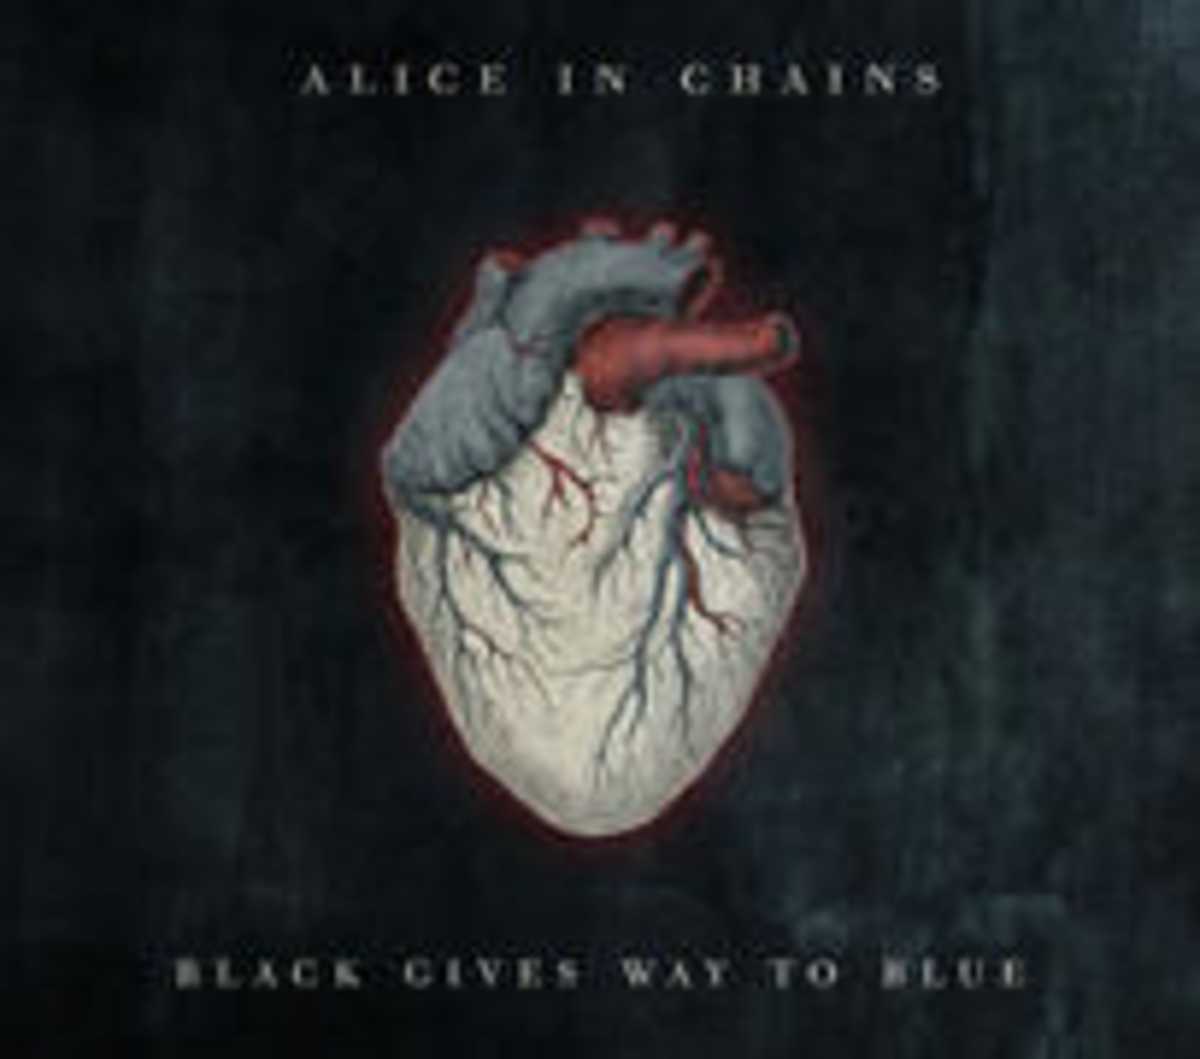 Alice in Chains - Black gives way to blue